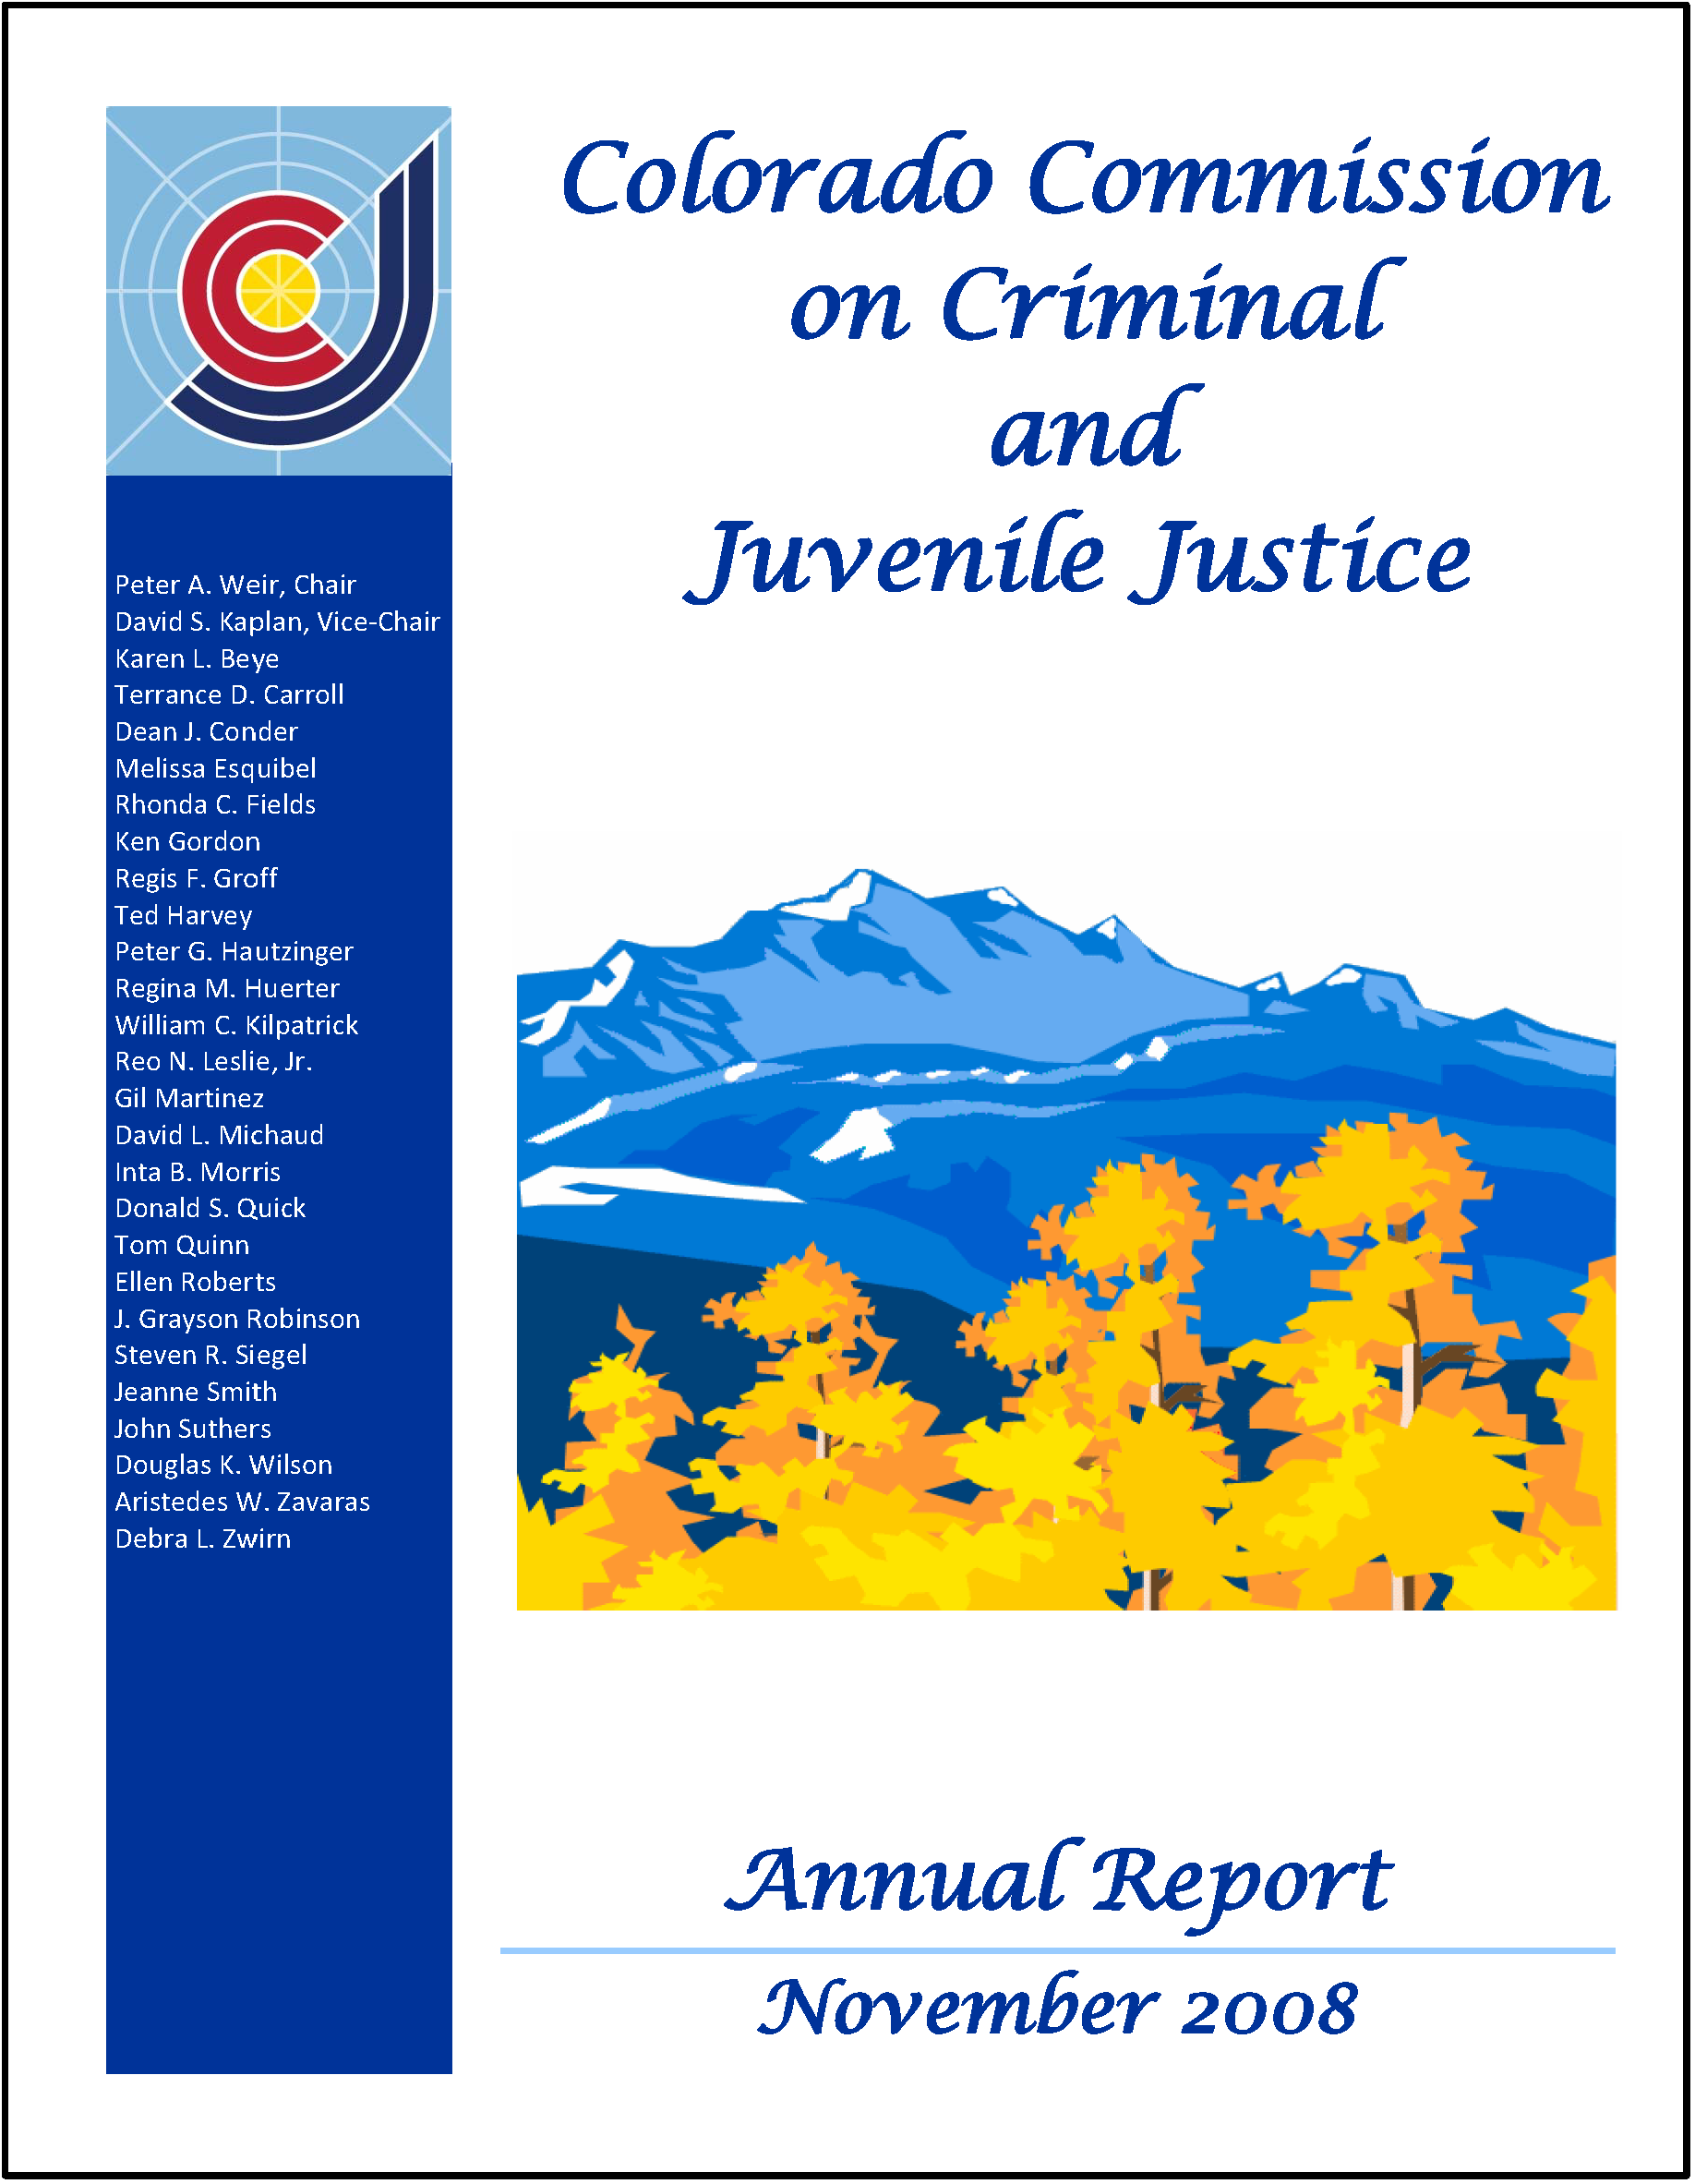 Colorado Commission on Criminal and Juvenile Justice: 2008 Annual Report (December 2008)